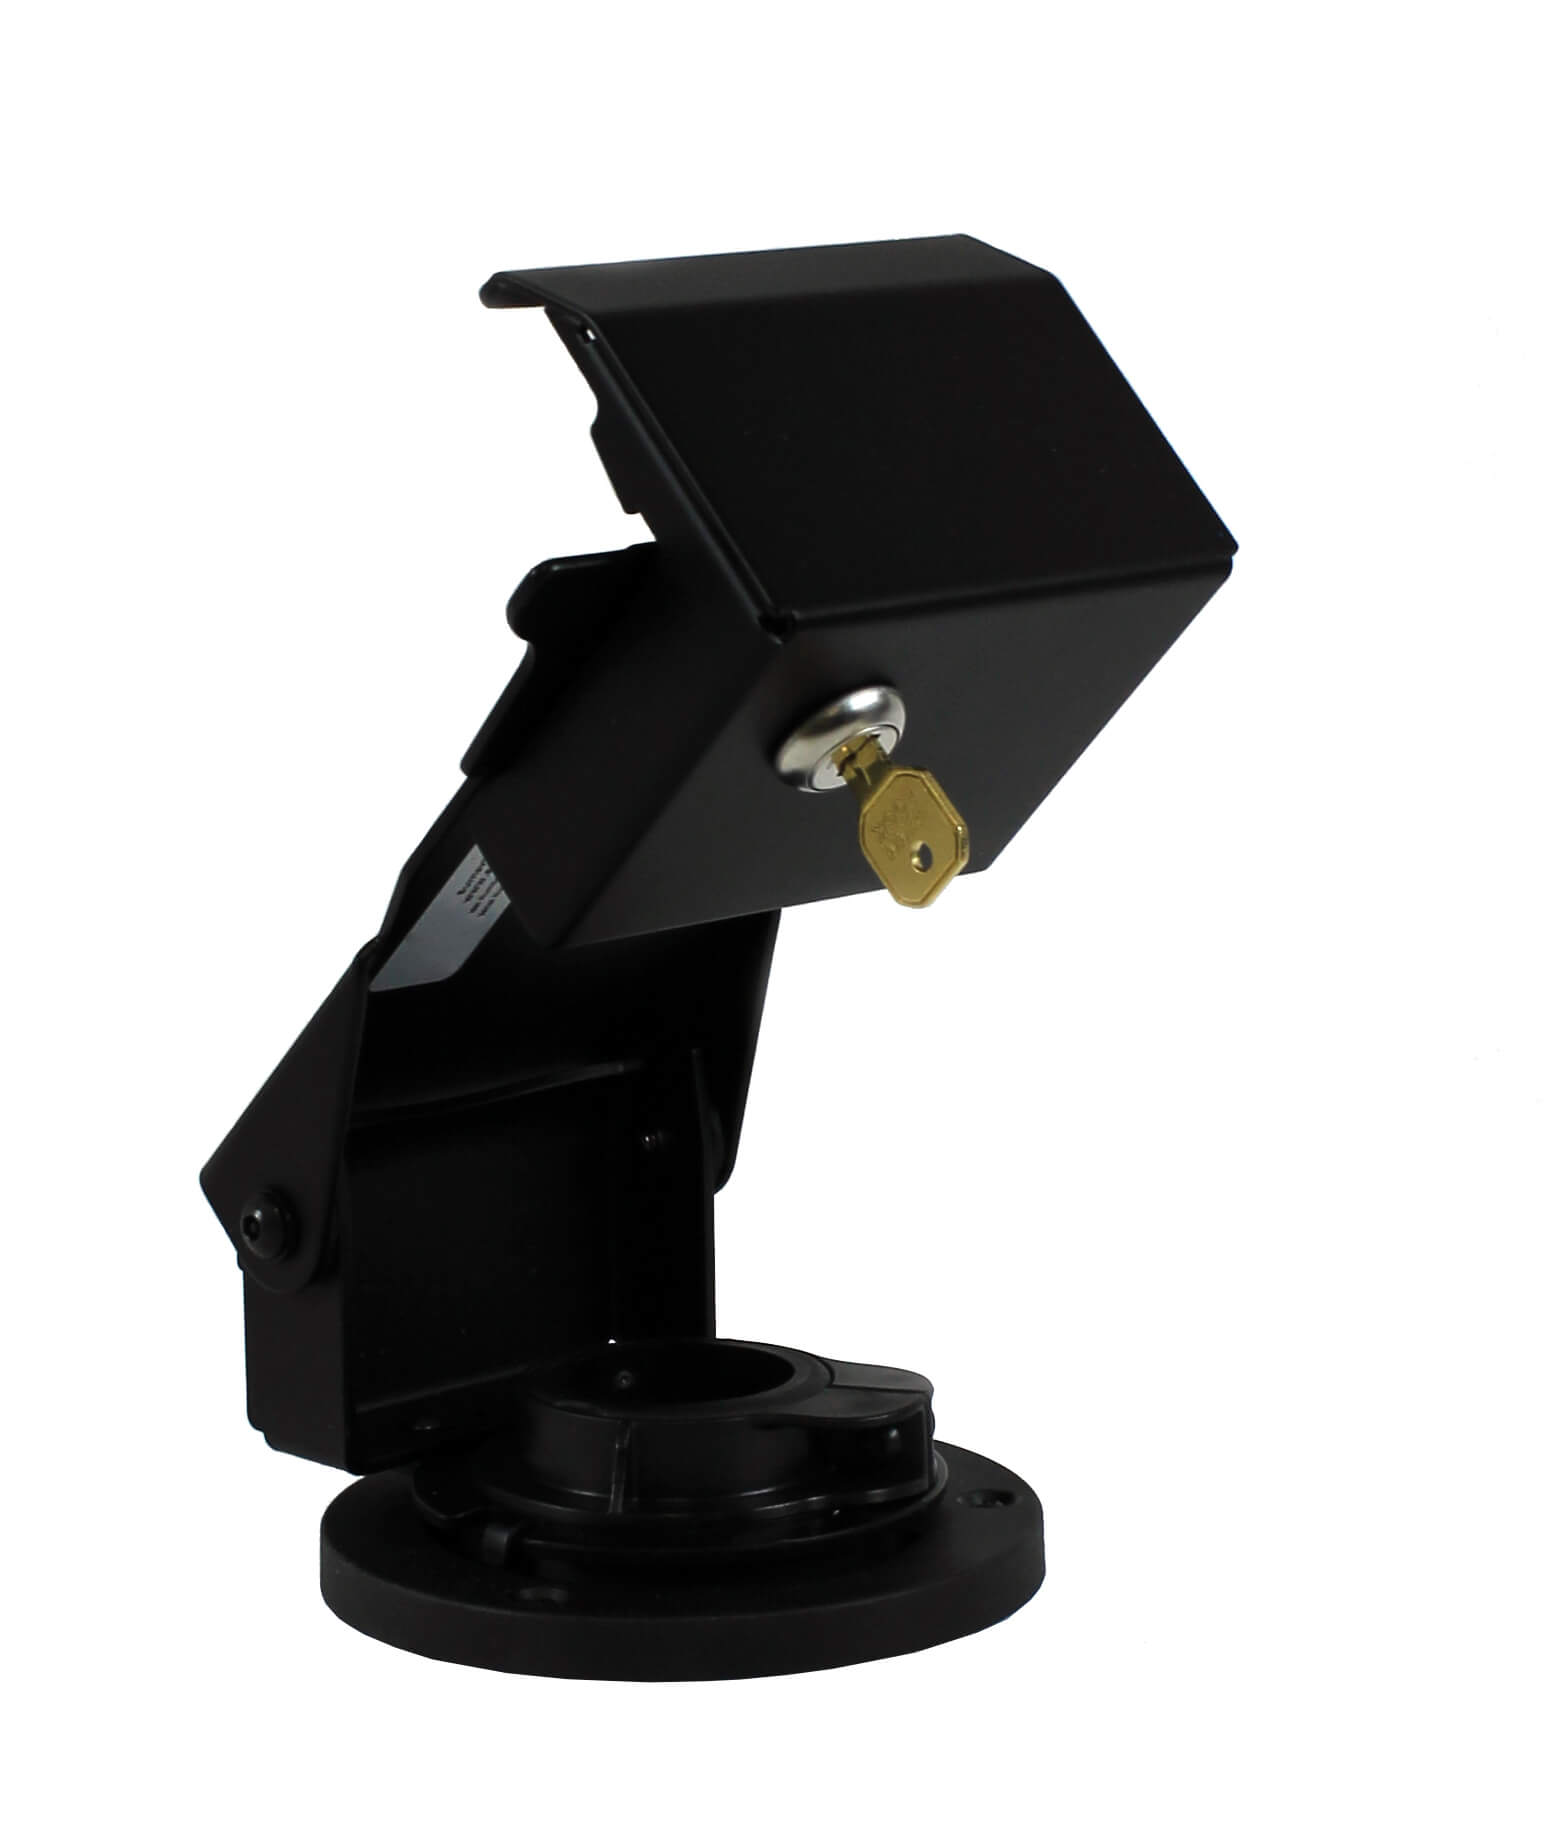 Round Base Metal Locking Stand for Verifone MX915 Payment Terminals